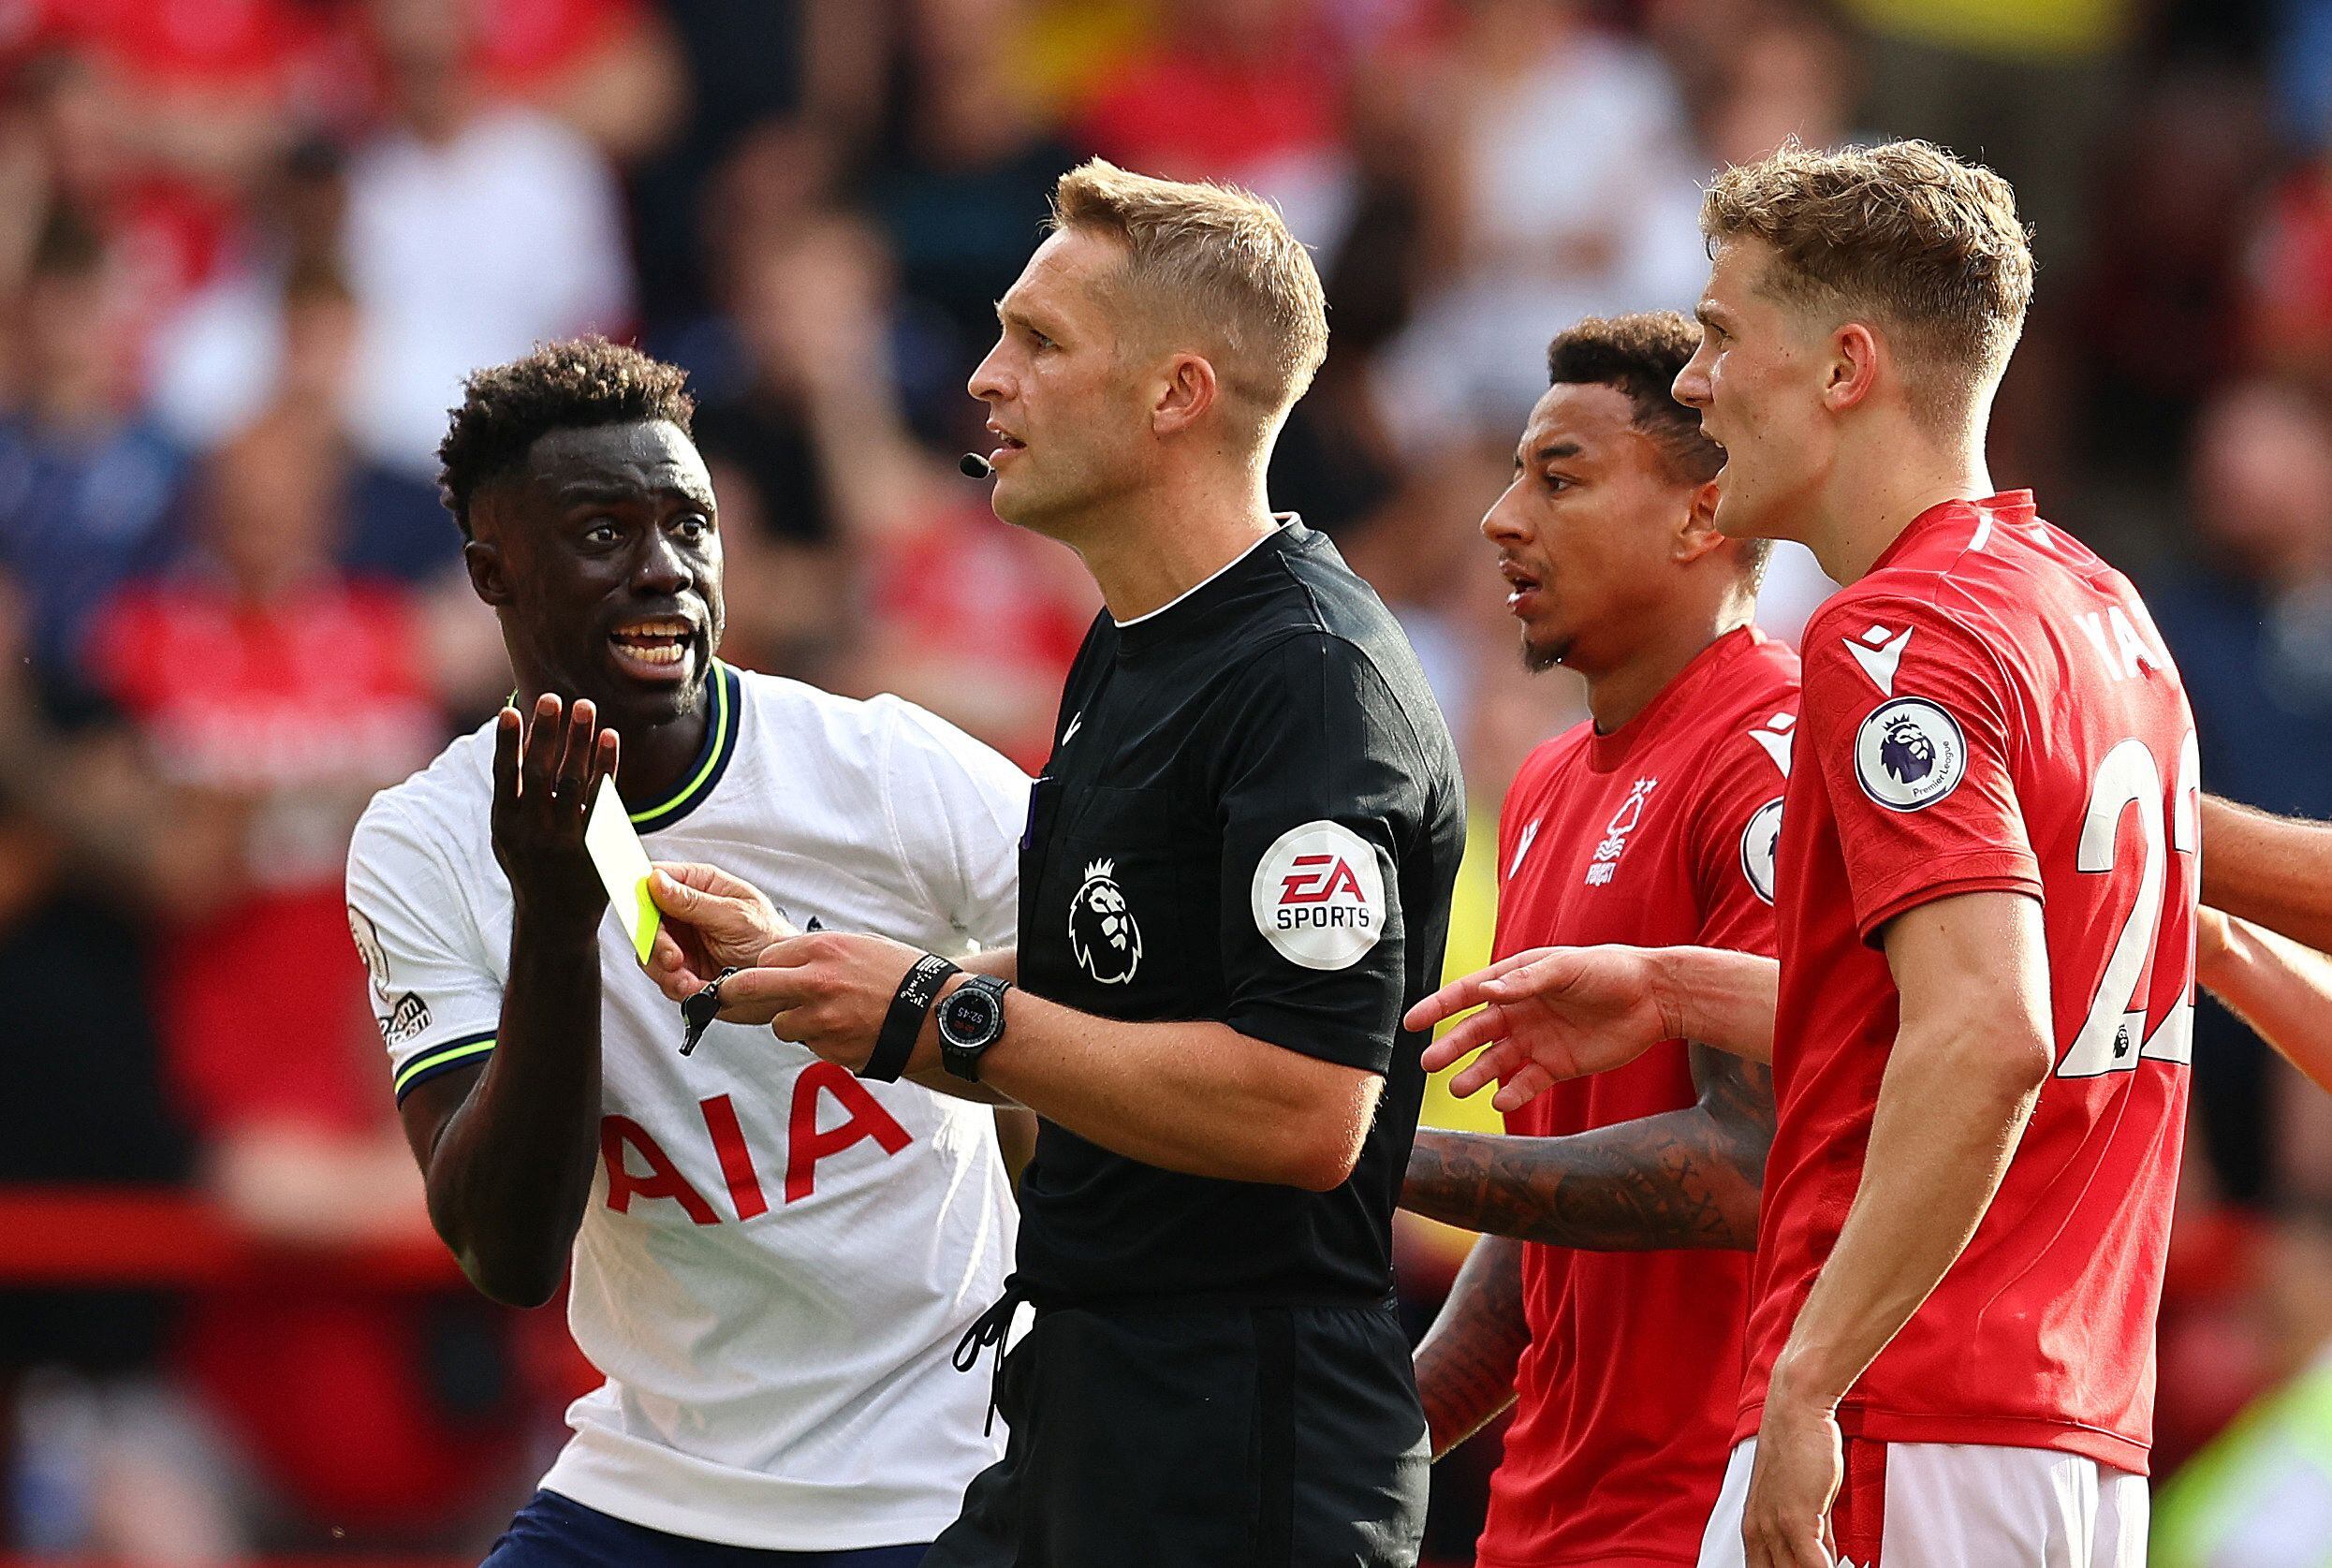 Soccer Football - Premier League - Nottingham Forest v Tottenham Hotspur - The City Ground, Nottingham, Britain - August 28, 2022 Tottenham Hotspur's Davinson Sanchez reacts as referee Craig Pawson shows a yellow card REUTERS/David Klein EDITORIAL USE ONLY. No use with unauthorized audio, video, data, fixture lists, club/league logos or 'live' services. Online in-match use limited to 75 images, no video emulation. No use in betting, games or single club /league/player publications.  Please contact your account representative for further details.